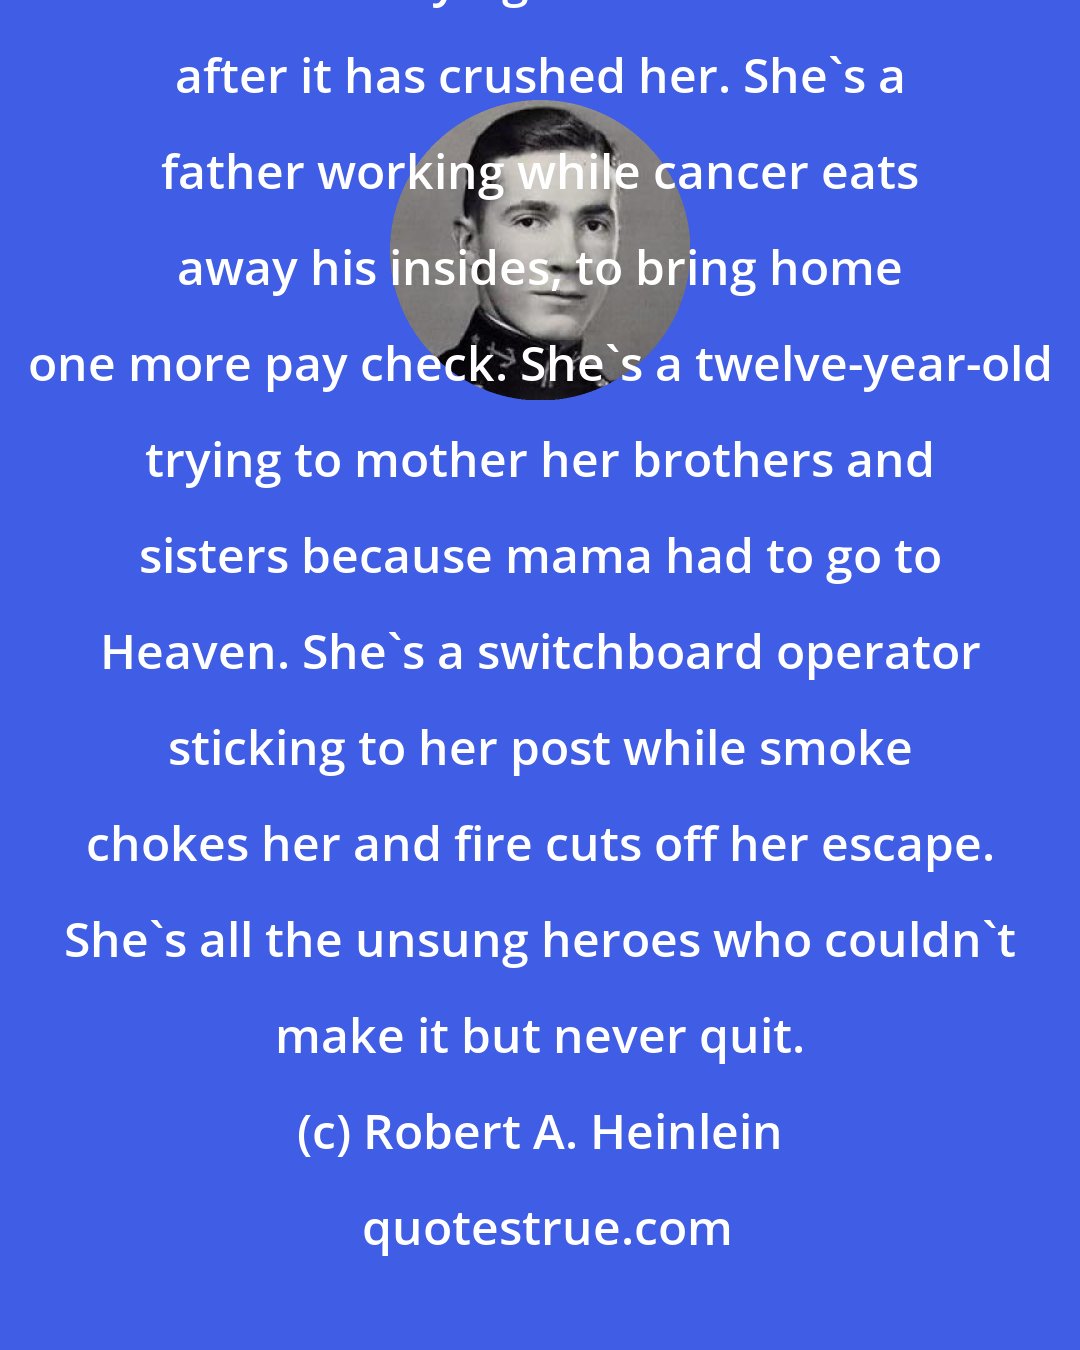 Robert A. Heinlein: Victory in defeat, there is none higher. She didn't give up, Ben; she's still trying to lift that stone after it has crushed her. She's a father working while cancer eats away his insides, to bring home one more pay check. She's a twelve-year-old trying to mother her brothers and sisters because mama had to go to Heaven. She's a switchboard operator sticking to her post while smoke chokes her and fire cuts off her escape. She's all the unsung heroes who couldn't make it but never quit.